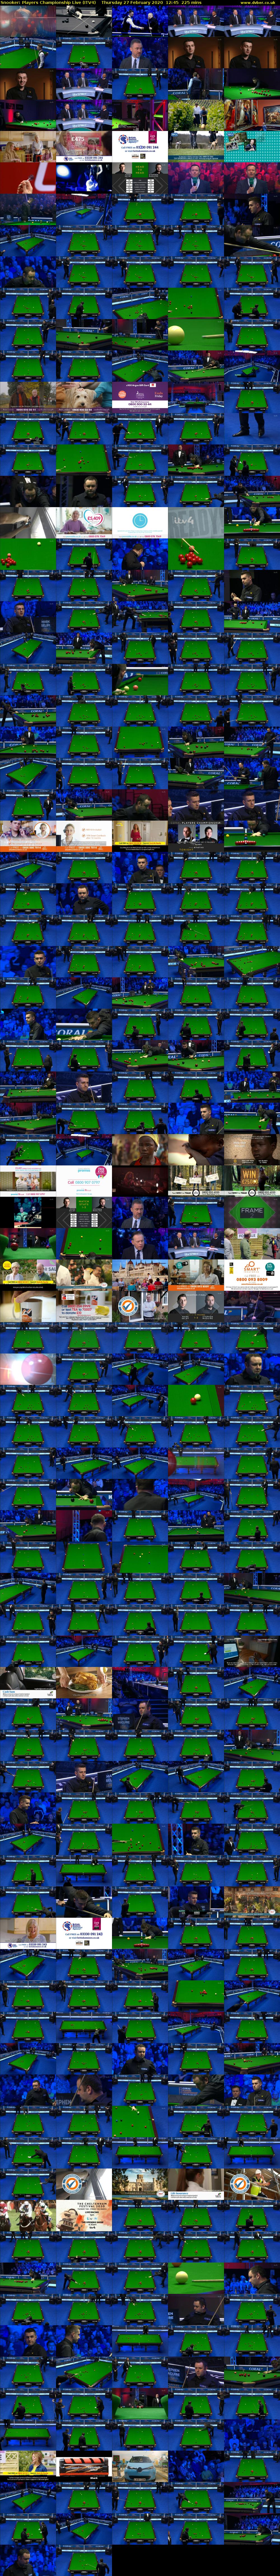 Snooker: Players Championship Live (ITV4) Thursday 27 February 2020 12:45 - 16:30